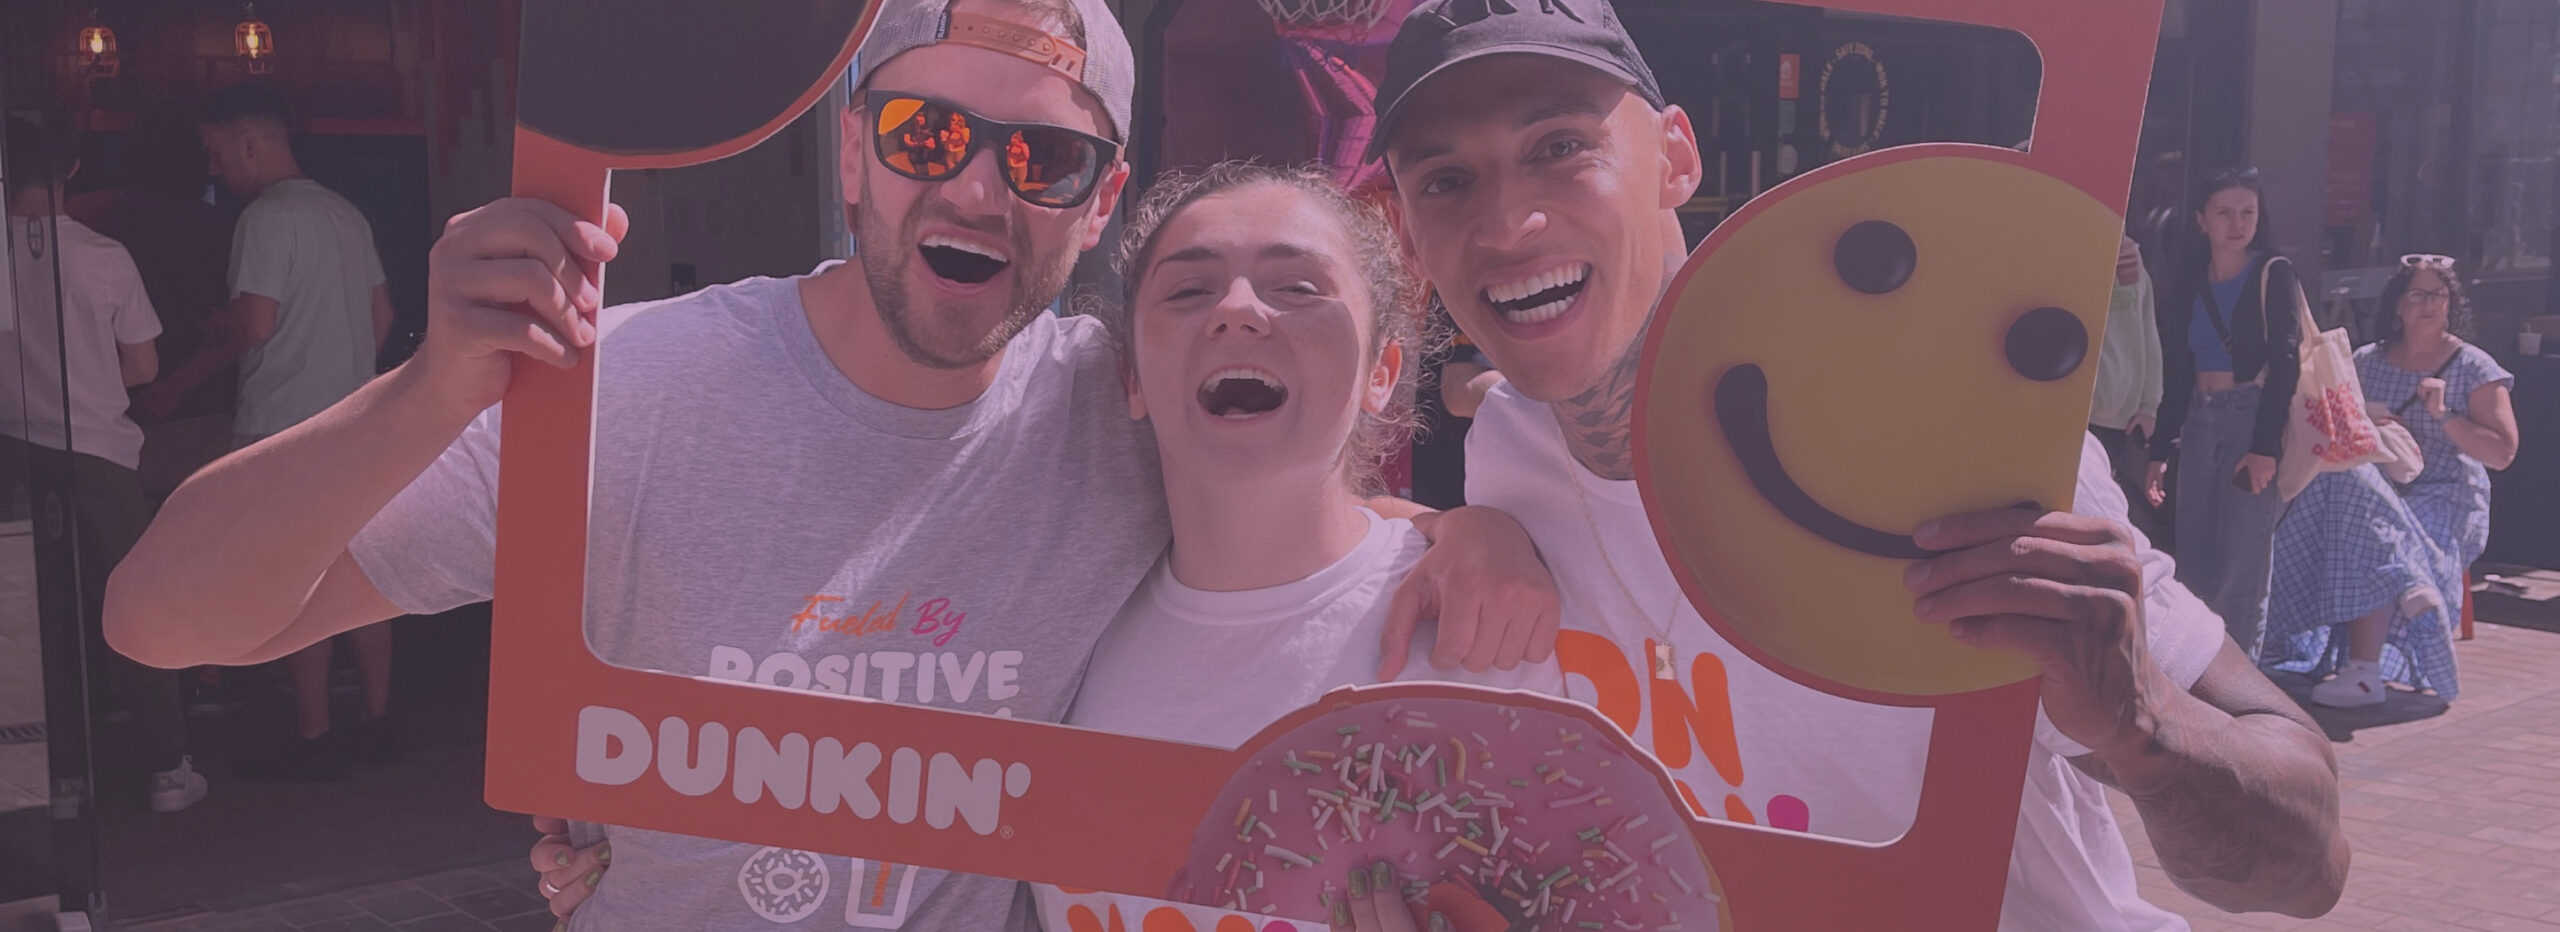 Three people holding a Dunkin' donuts frame